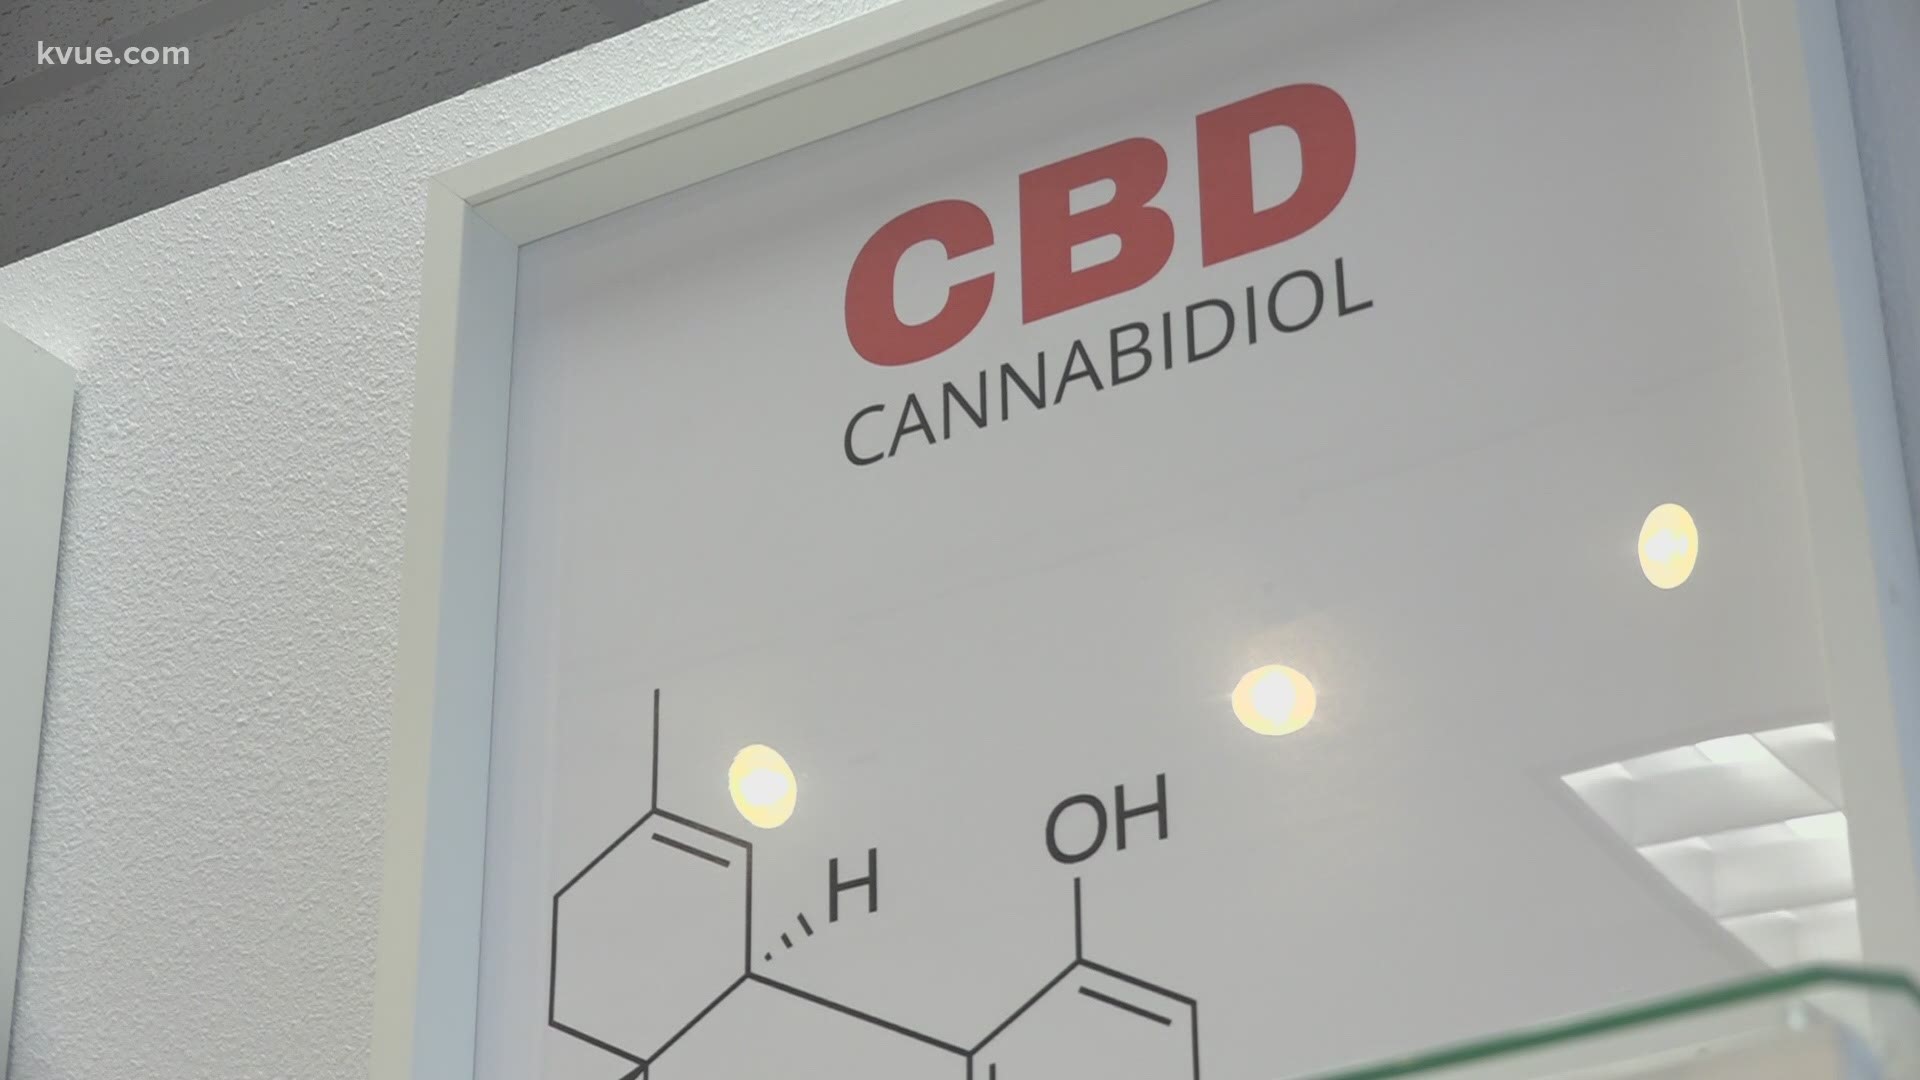 A University of Texas researchers is looking into how CBD oil can combat anxiety, especially anxiety brought on by the pandemic.